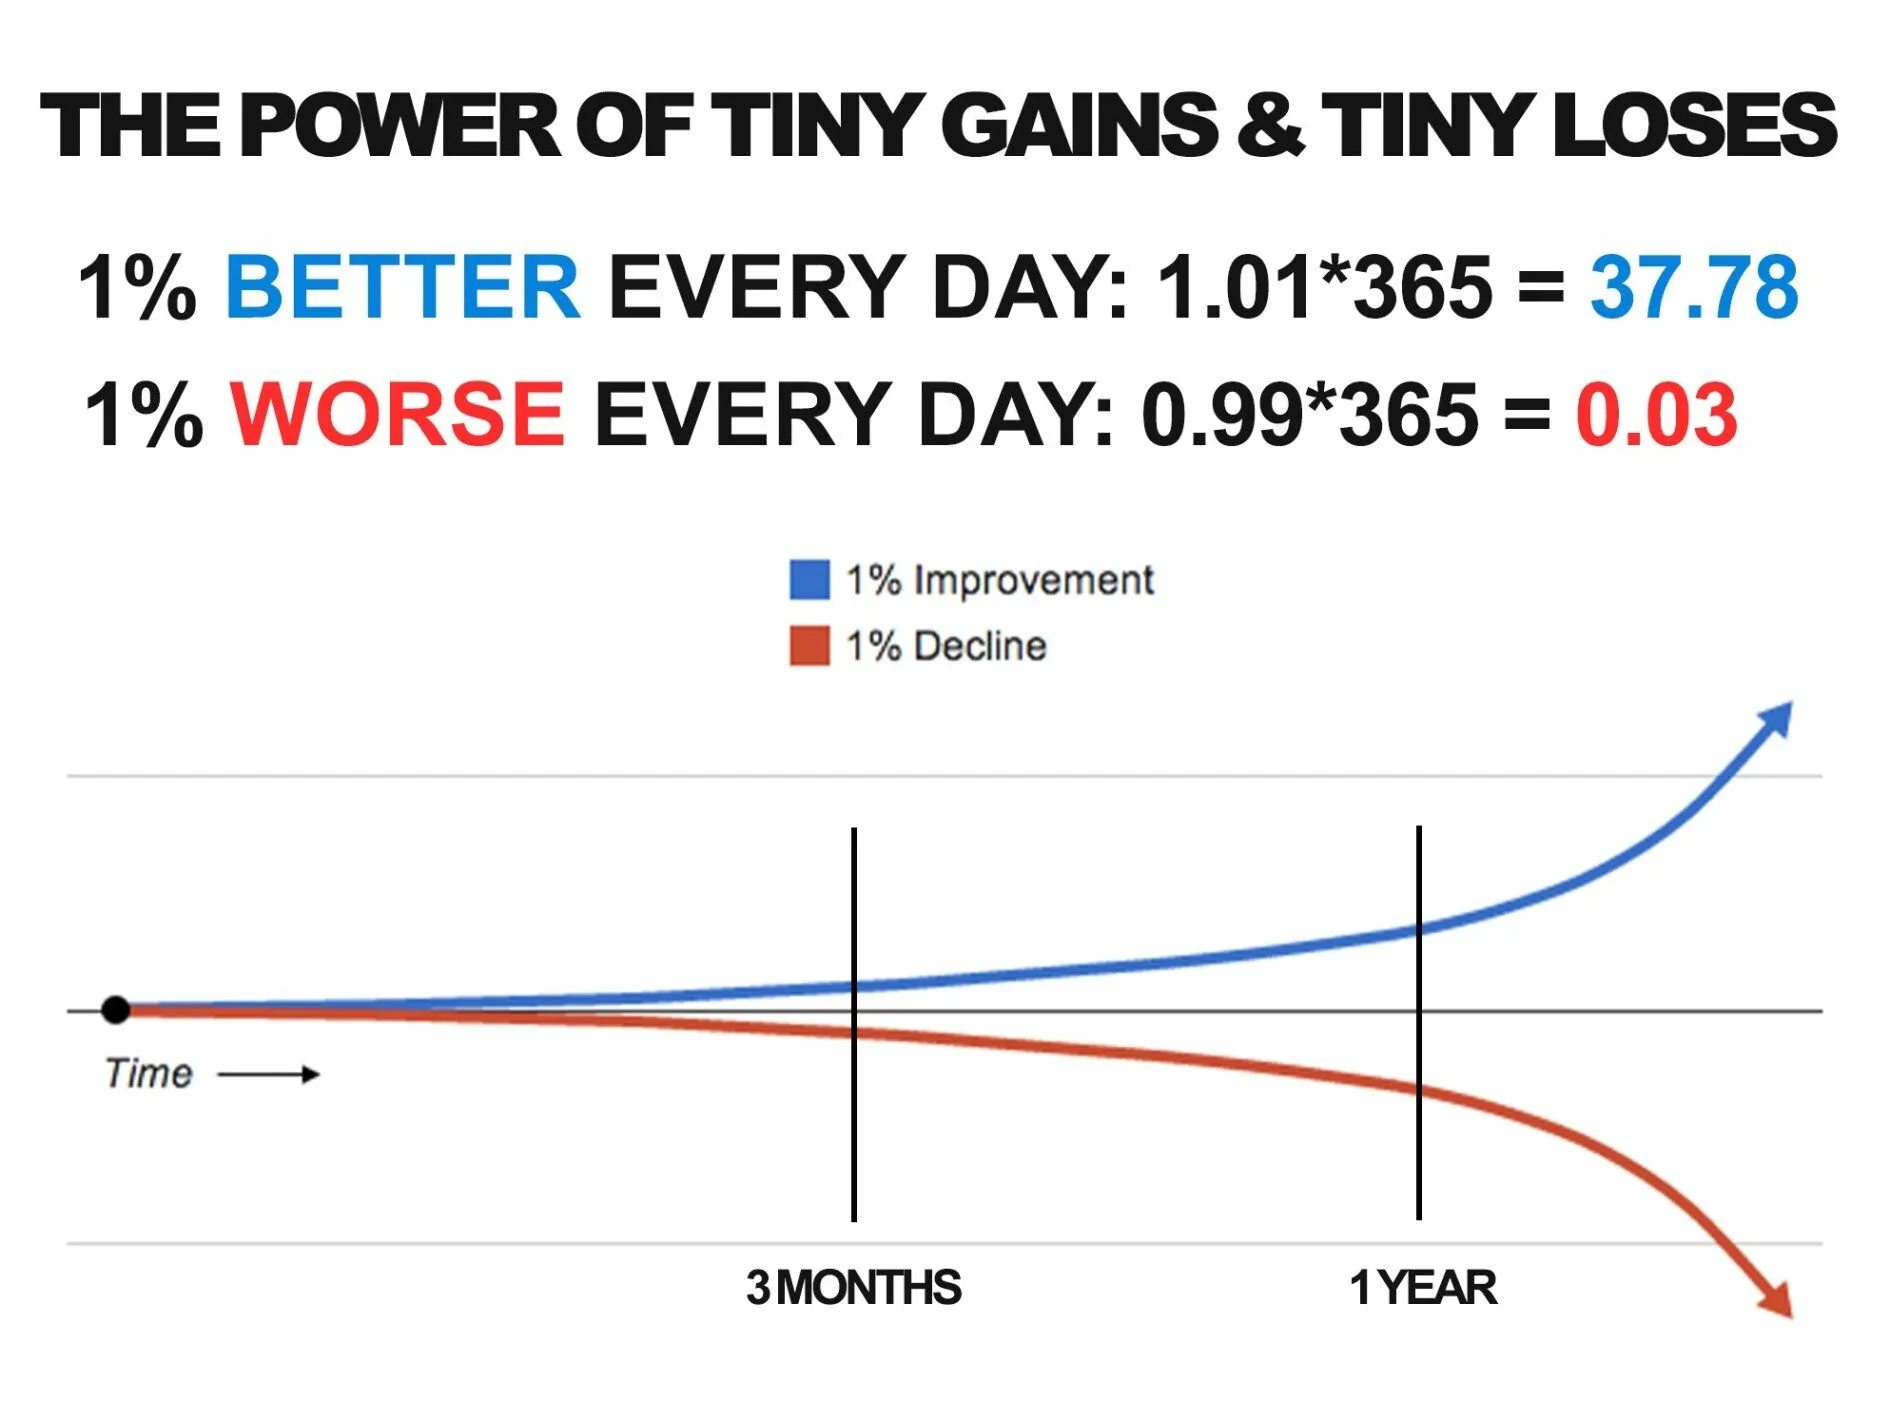 The power of tiny gains and tiny losses